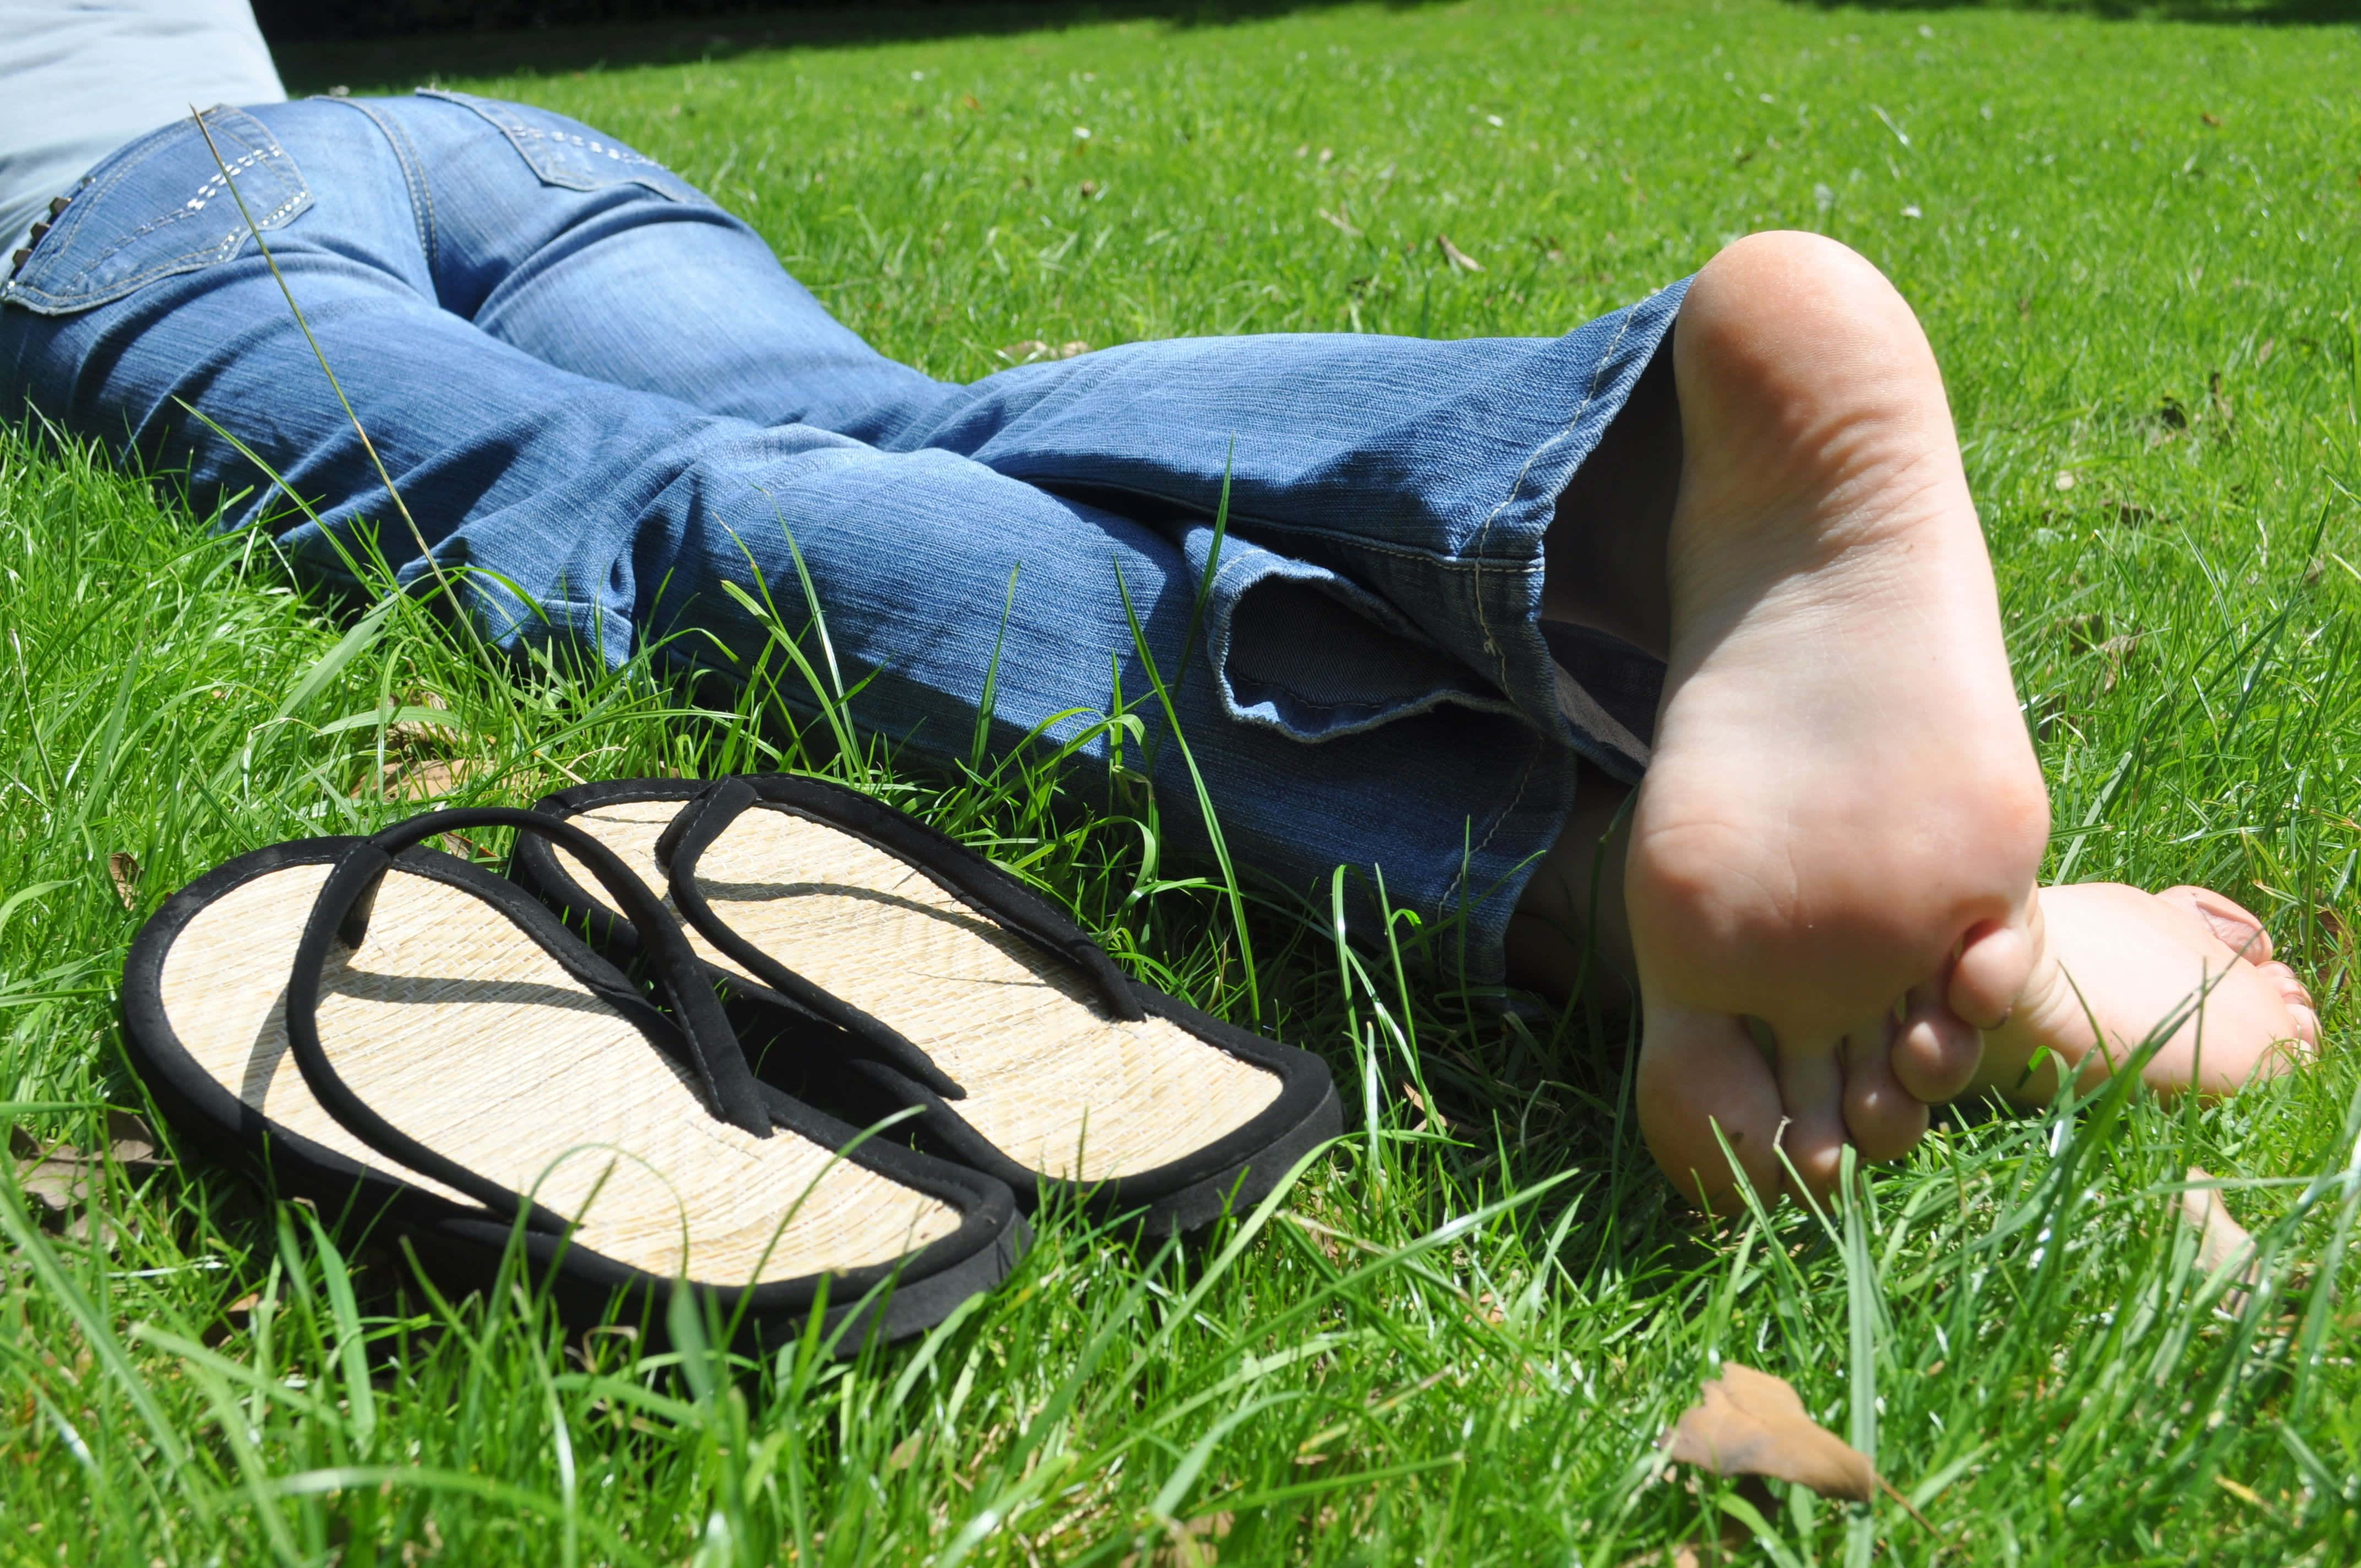 Download Sole Of Woman Laying On Grass Wallpaper | Wallpapers.com